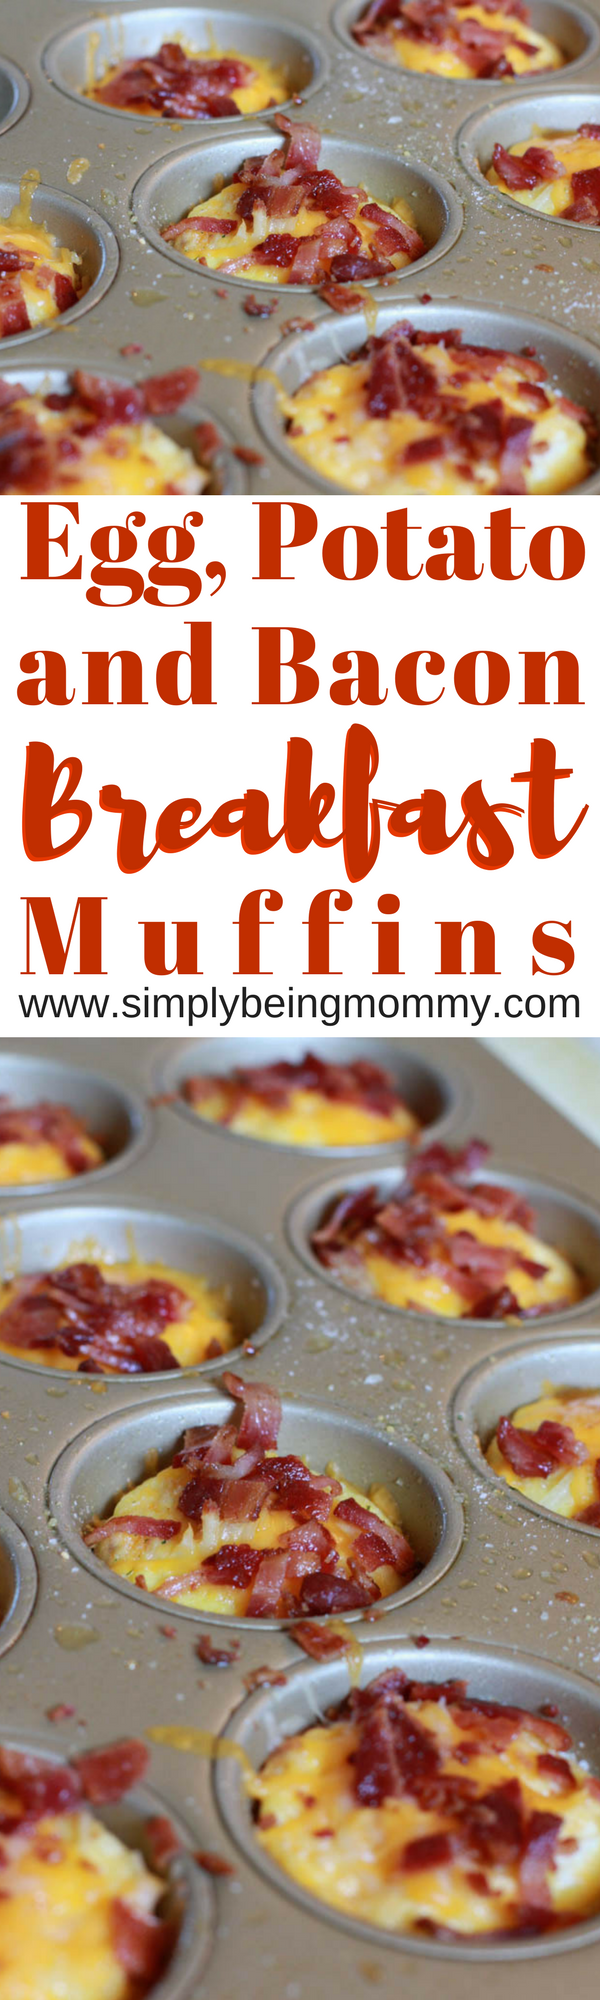 Egg, Potato, and Bacon Breakfast Muffins - perfect breakfast solution